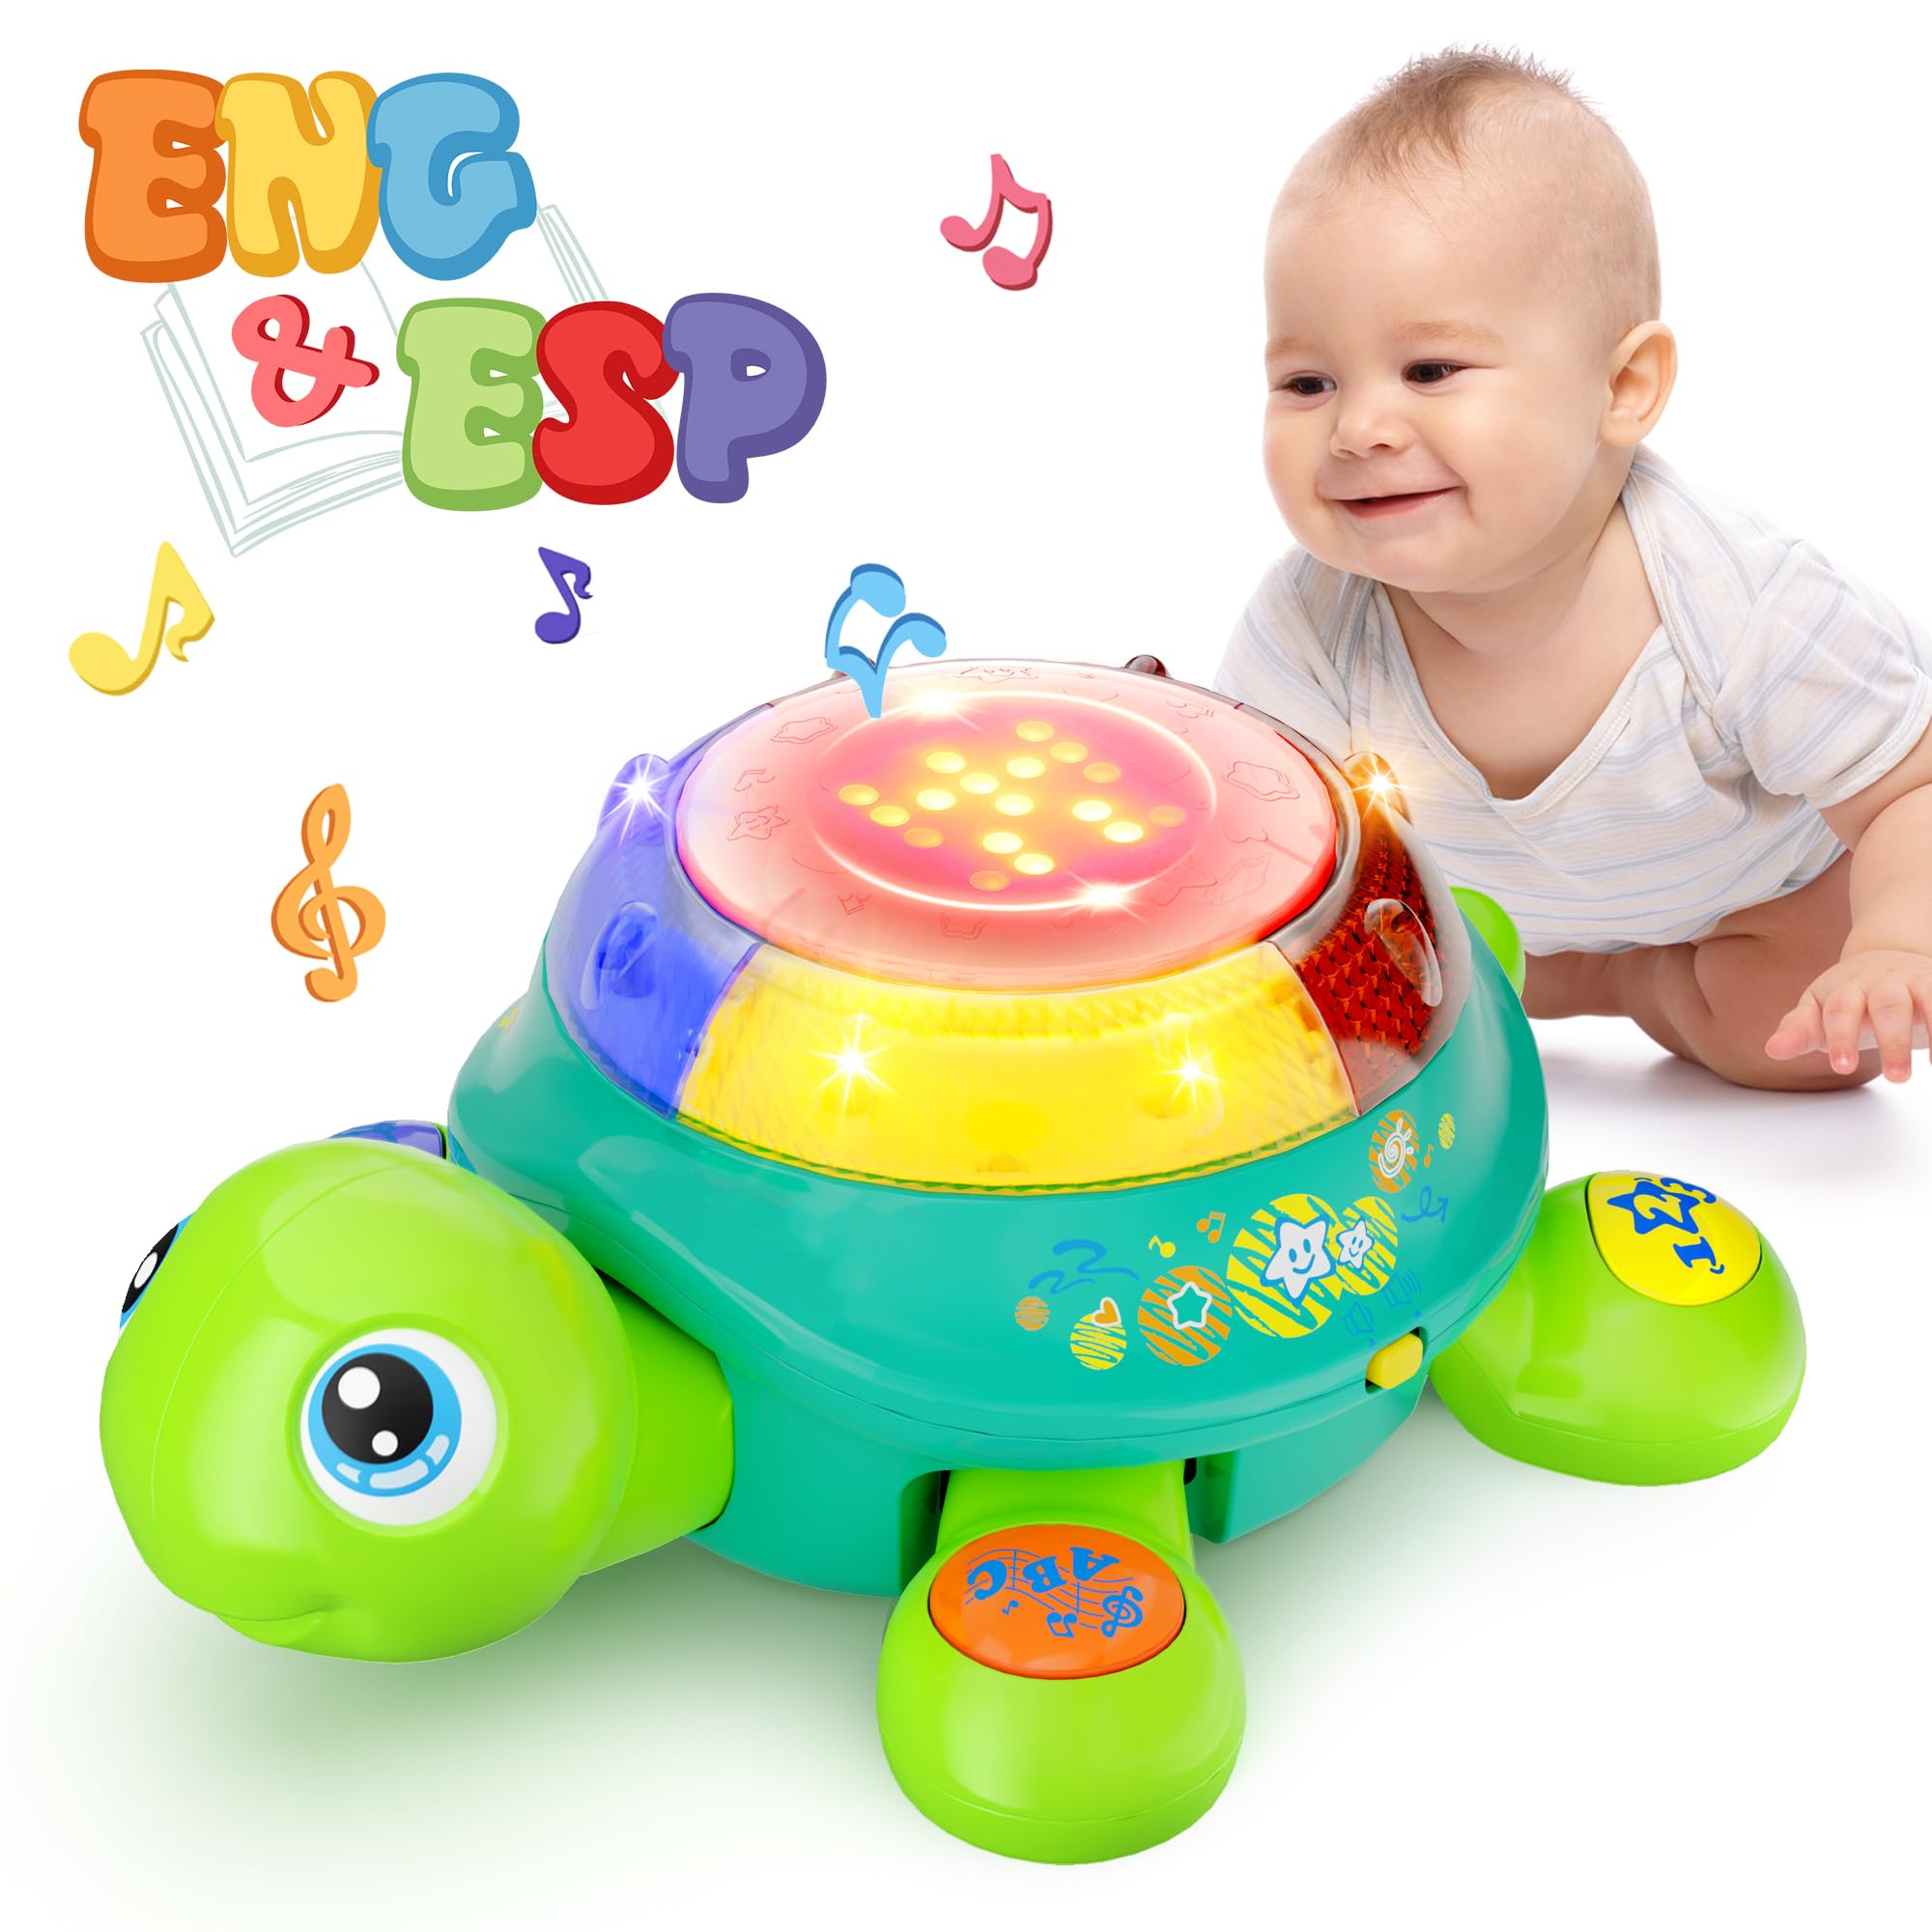 Best Educational Toys For Infants: Top Picks for Early Learning and Development (2023)